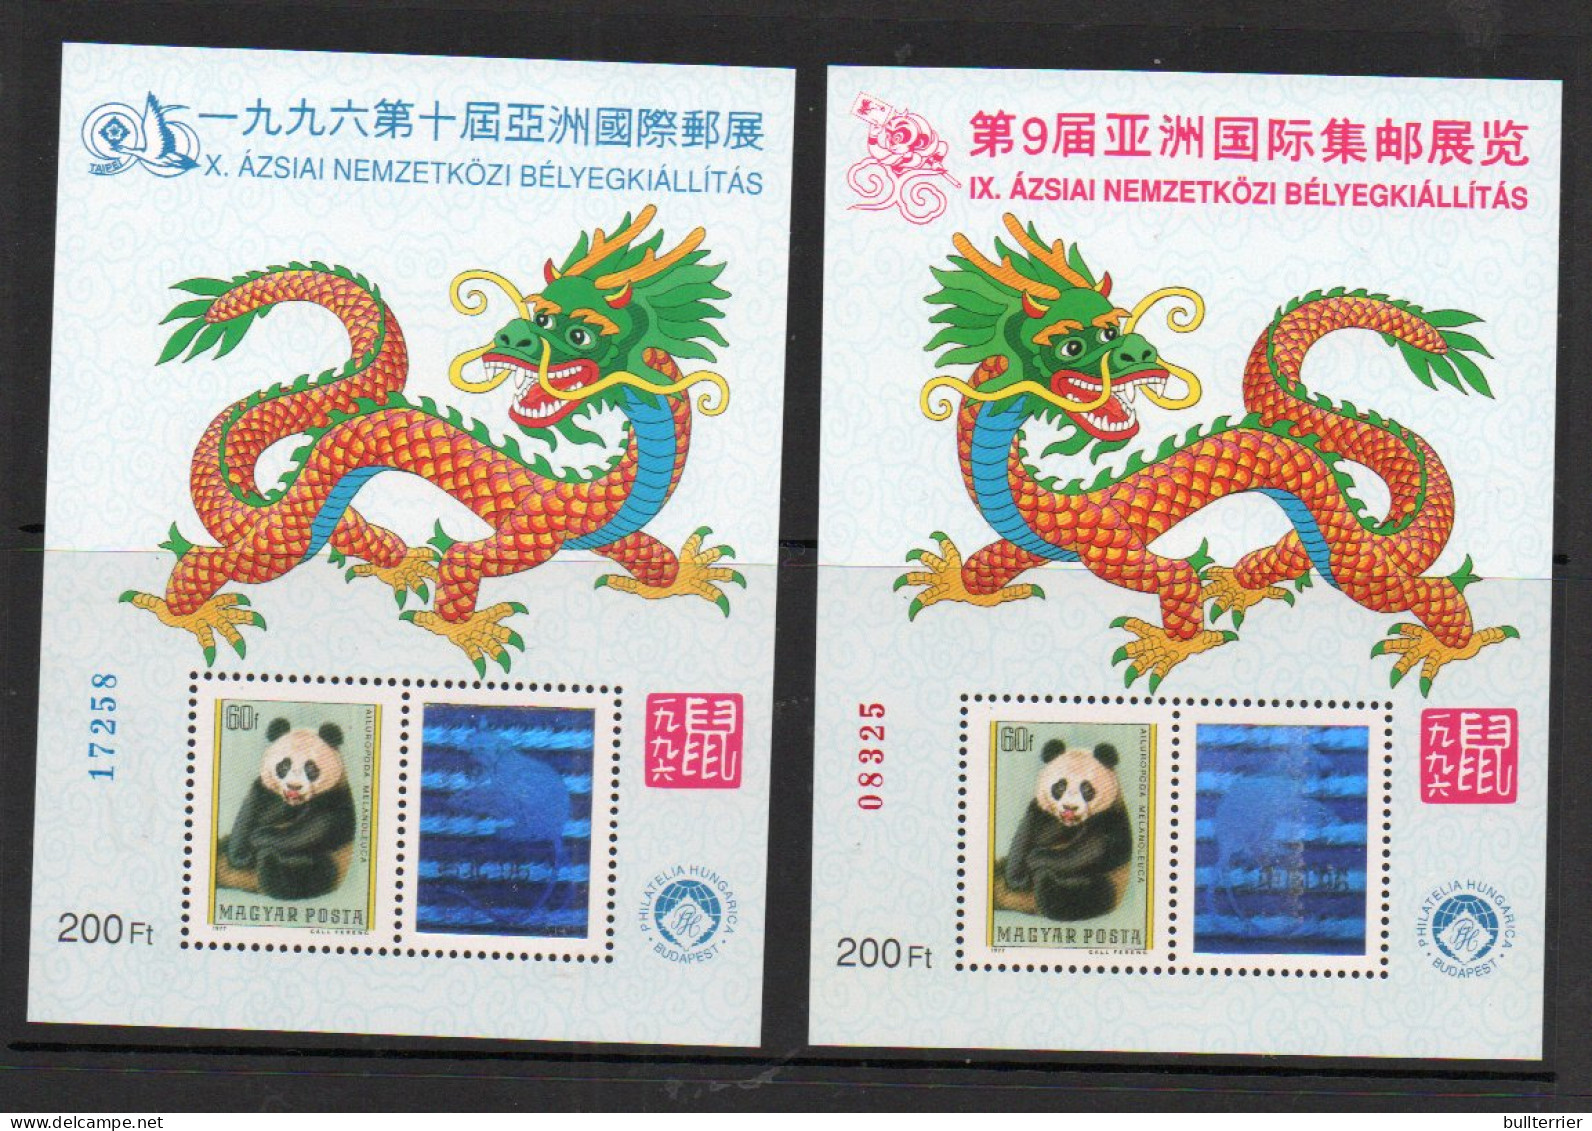 HOLOGRAMS - HUNGARY - TAIPEI /YEAR OF DRAGON /  HOLOGRAM S/SHEETS  MINT NEVER HINGED,  - Hologramme